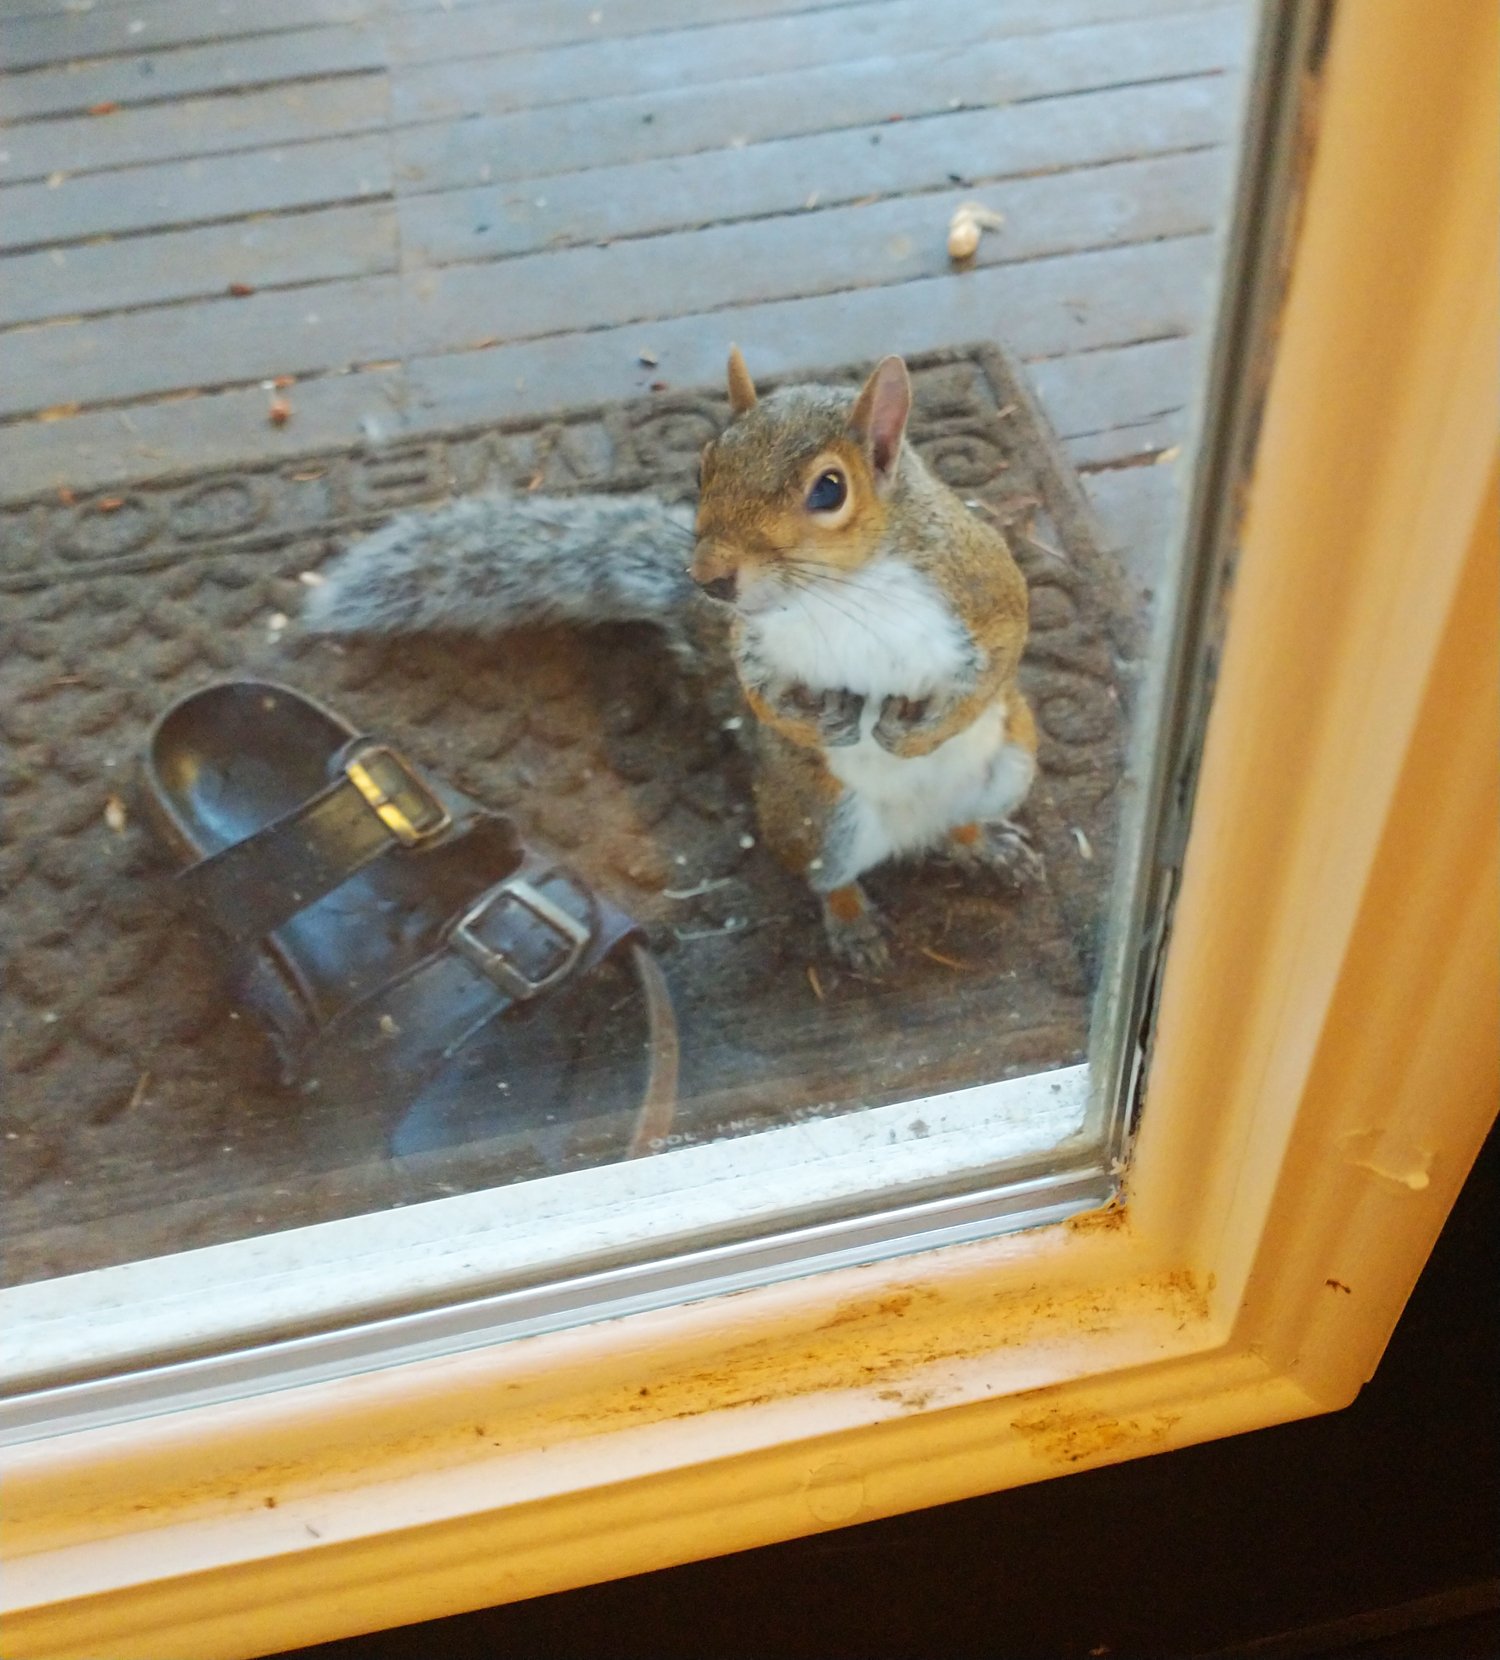 My friend is raising a squirrel army at his house.